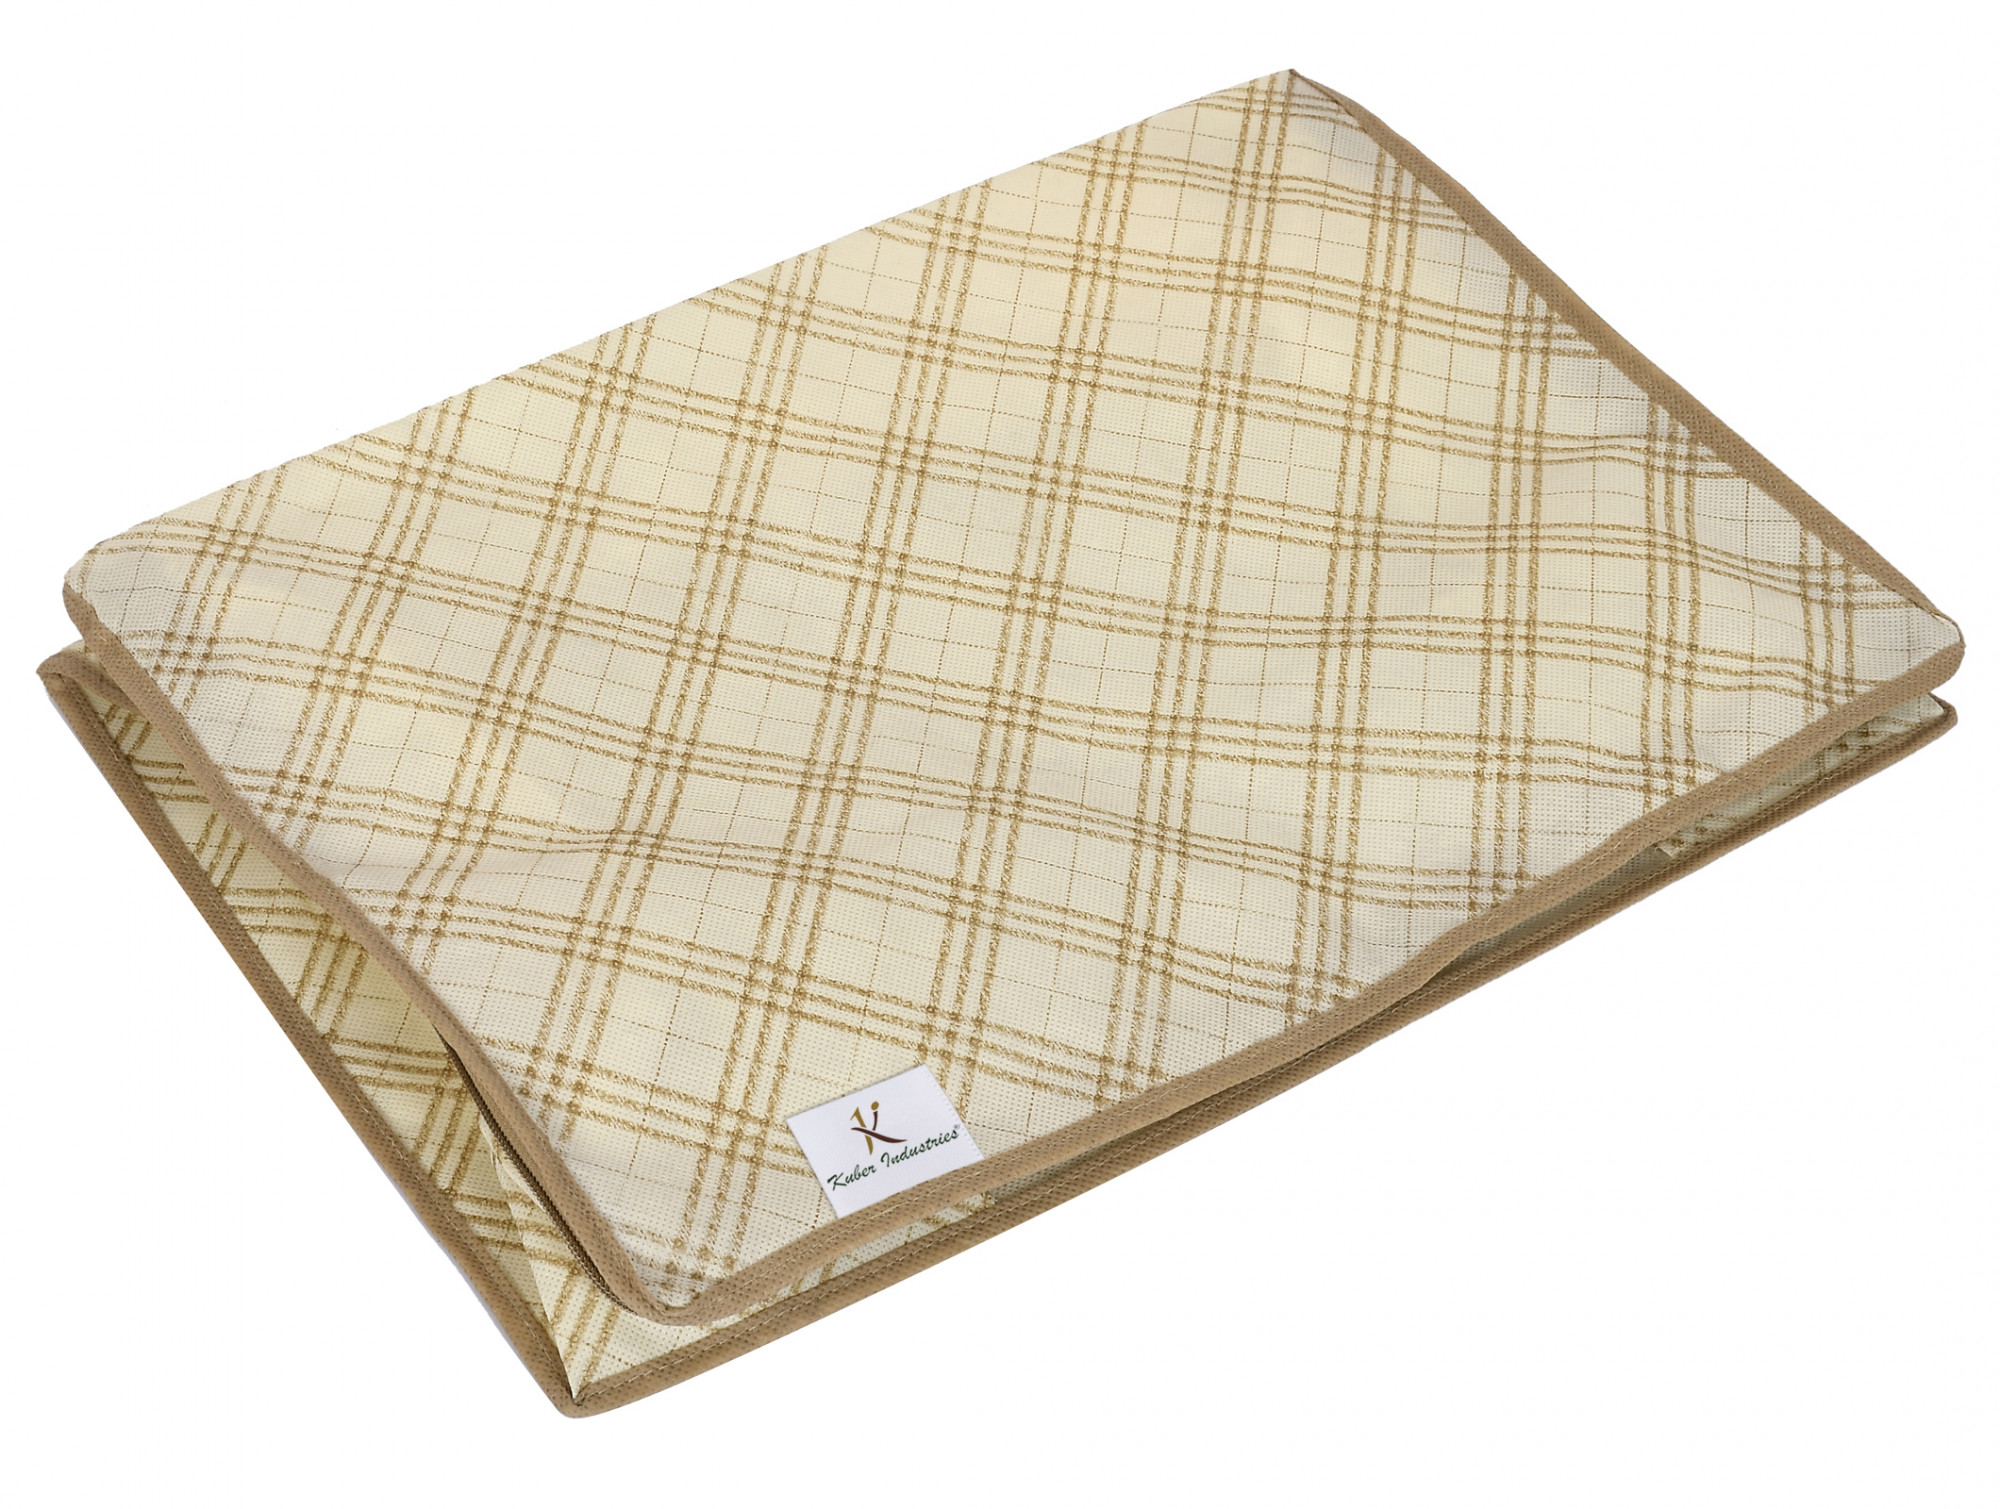 Kuber Industries Metalic Checkered Print Non Woven Underbed Storage Bag,Cloth Organiser,Blanket Cover with Transparent Window (Ivory)-34_S_KUBMART16581